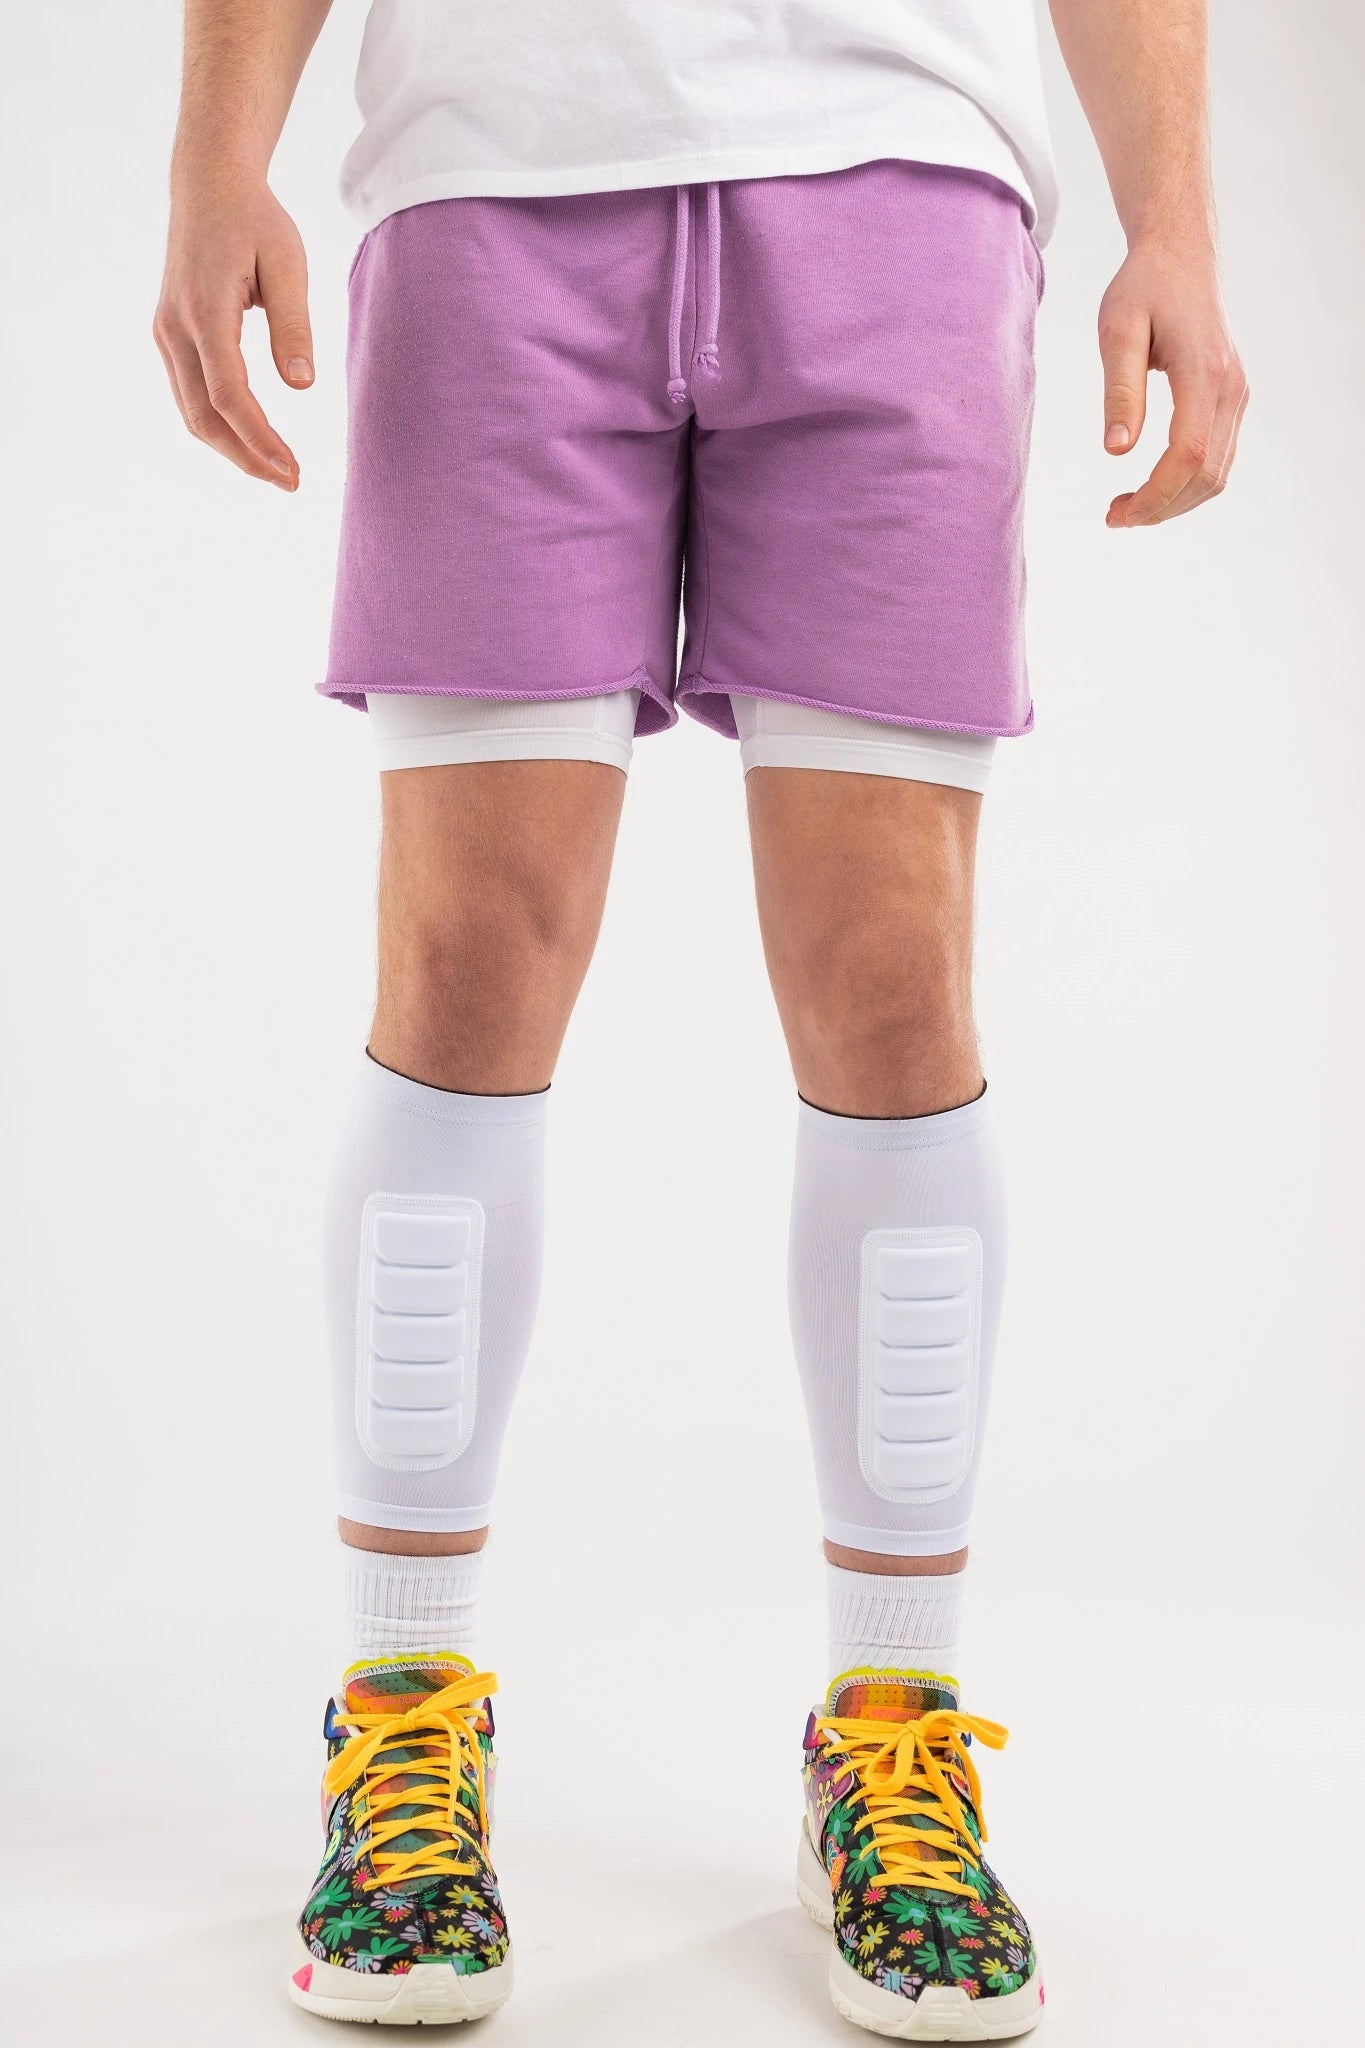 PERFORMANCE CALF SLEEVE (PAIR) – Court Candy